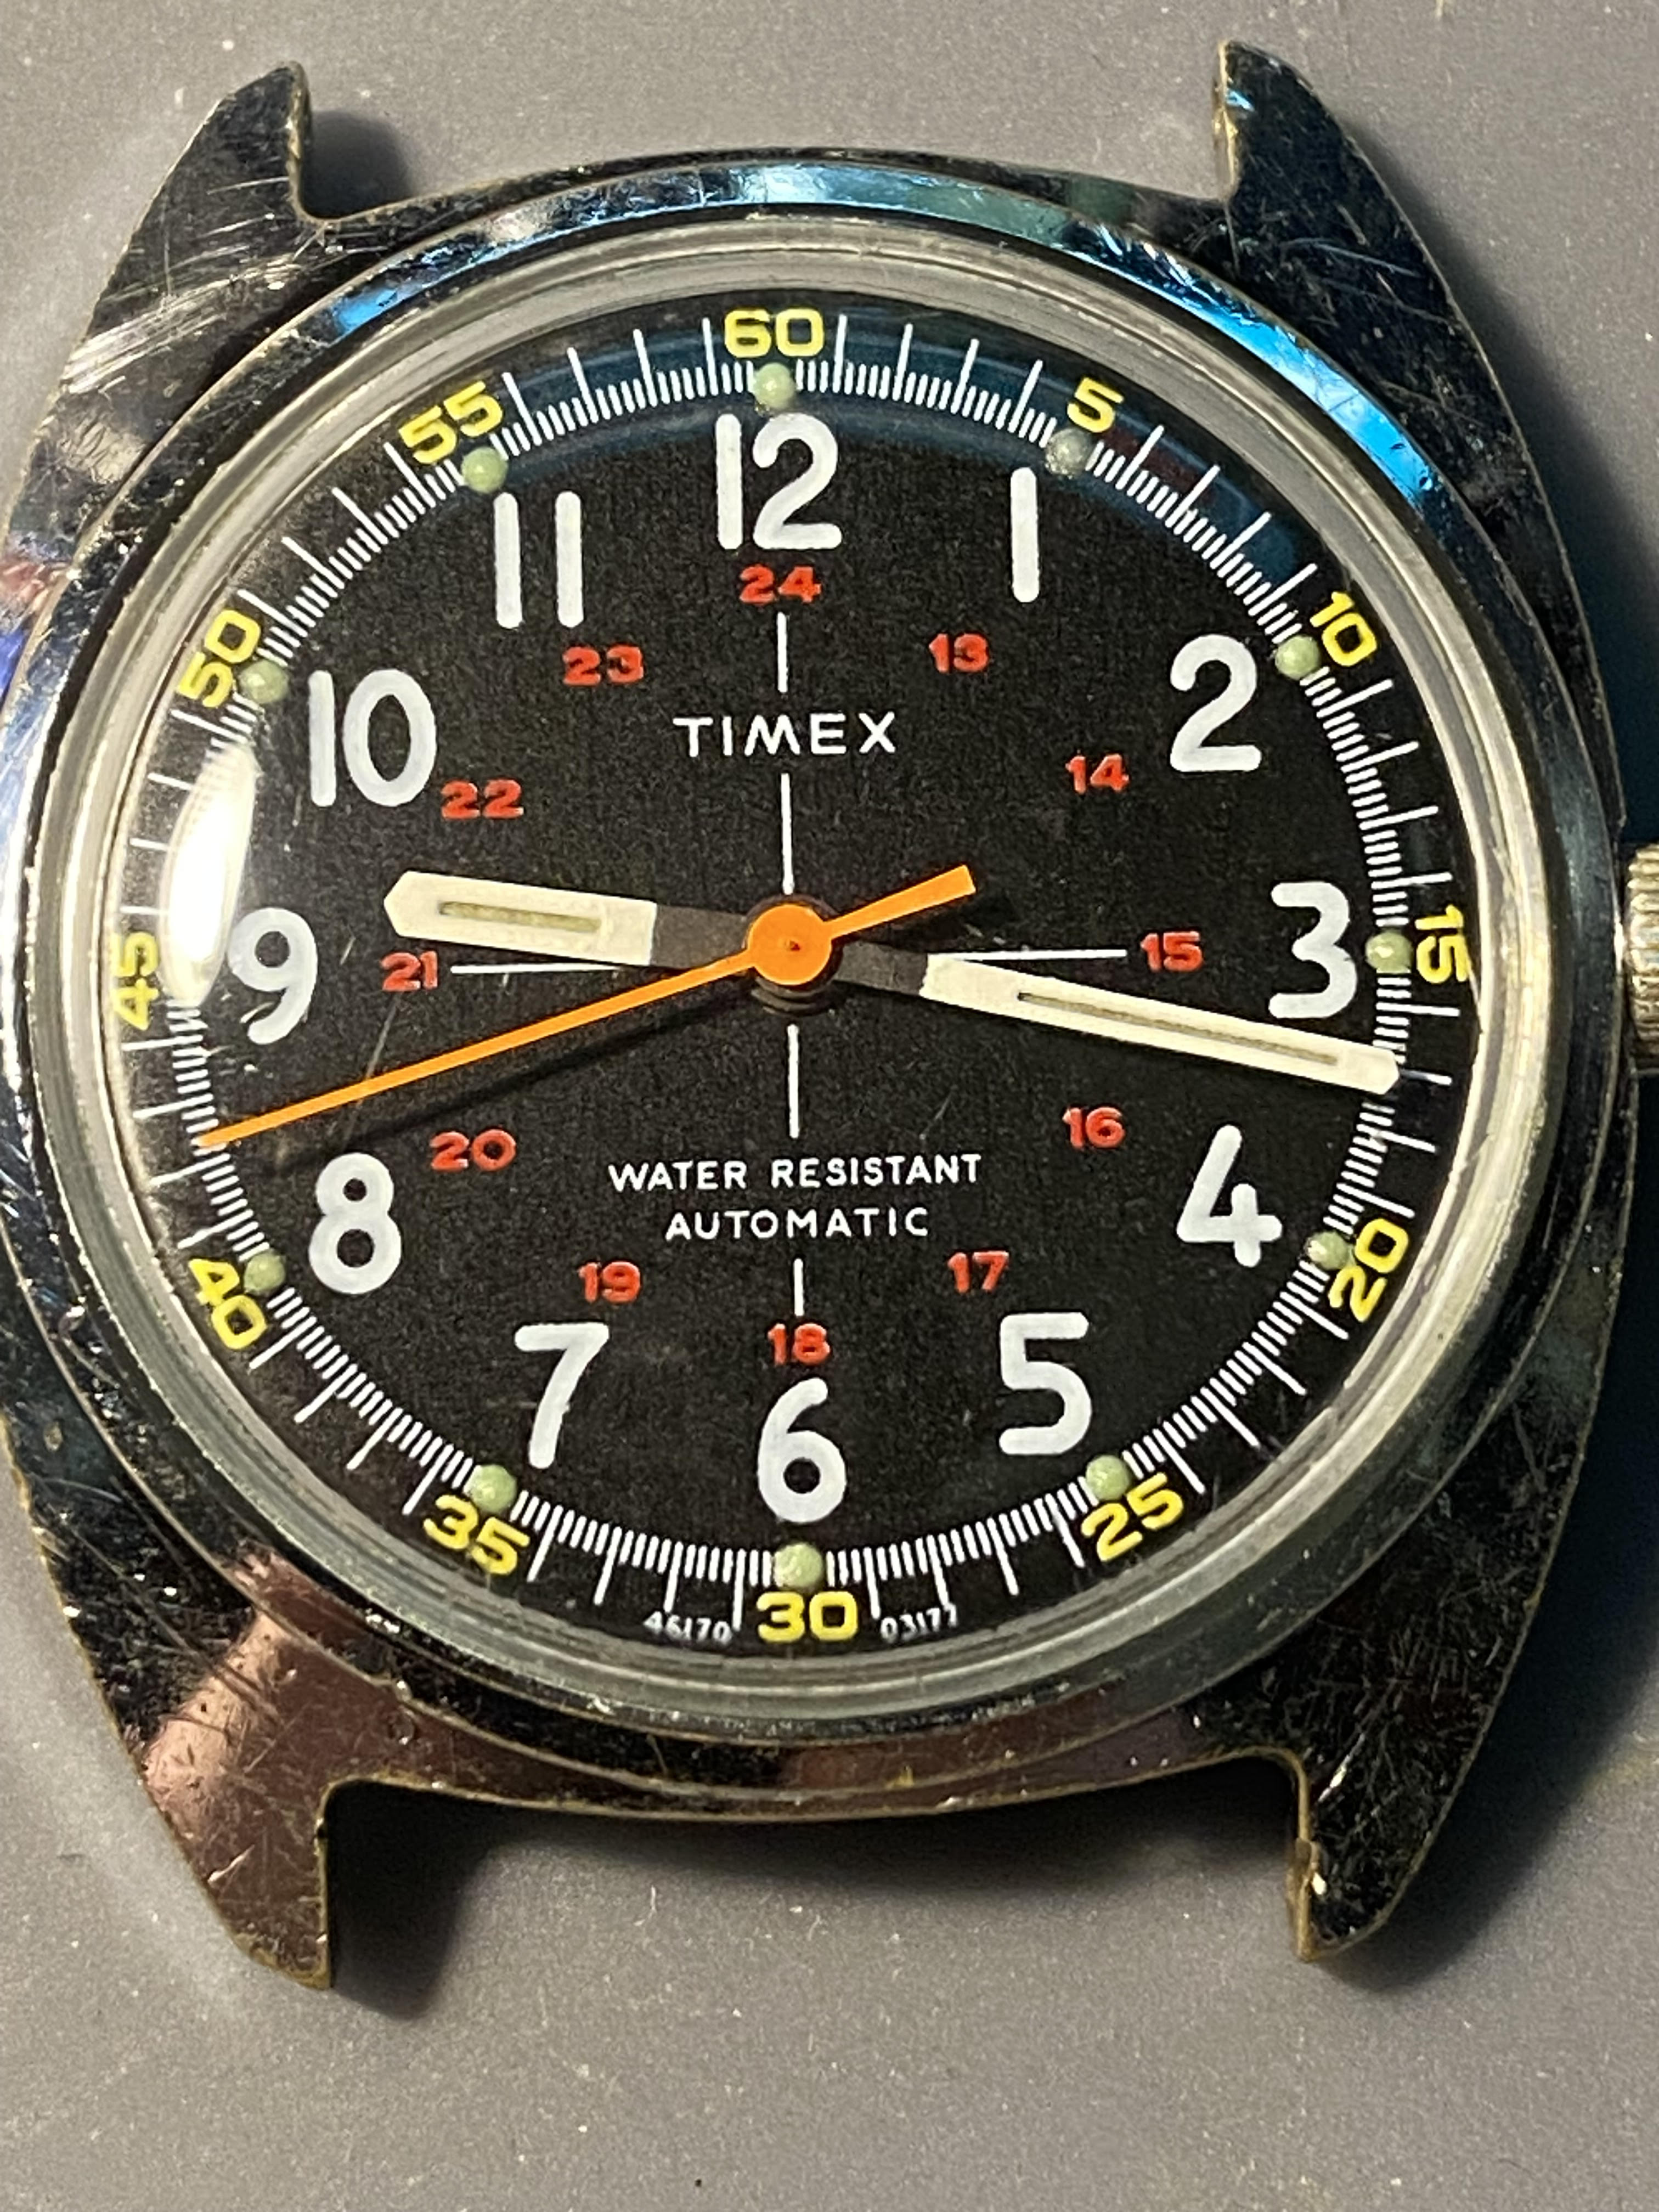 107 Timex Automatic - Before and After - Your Watch Collection - Watch ...